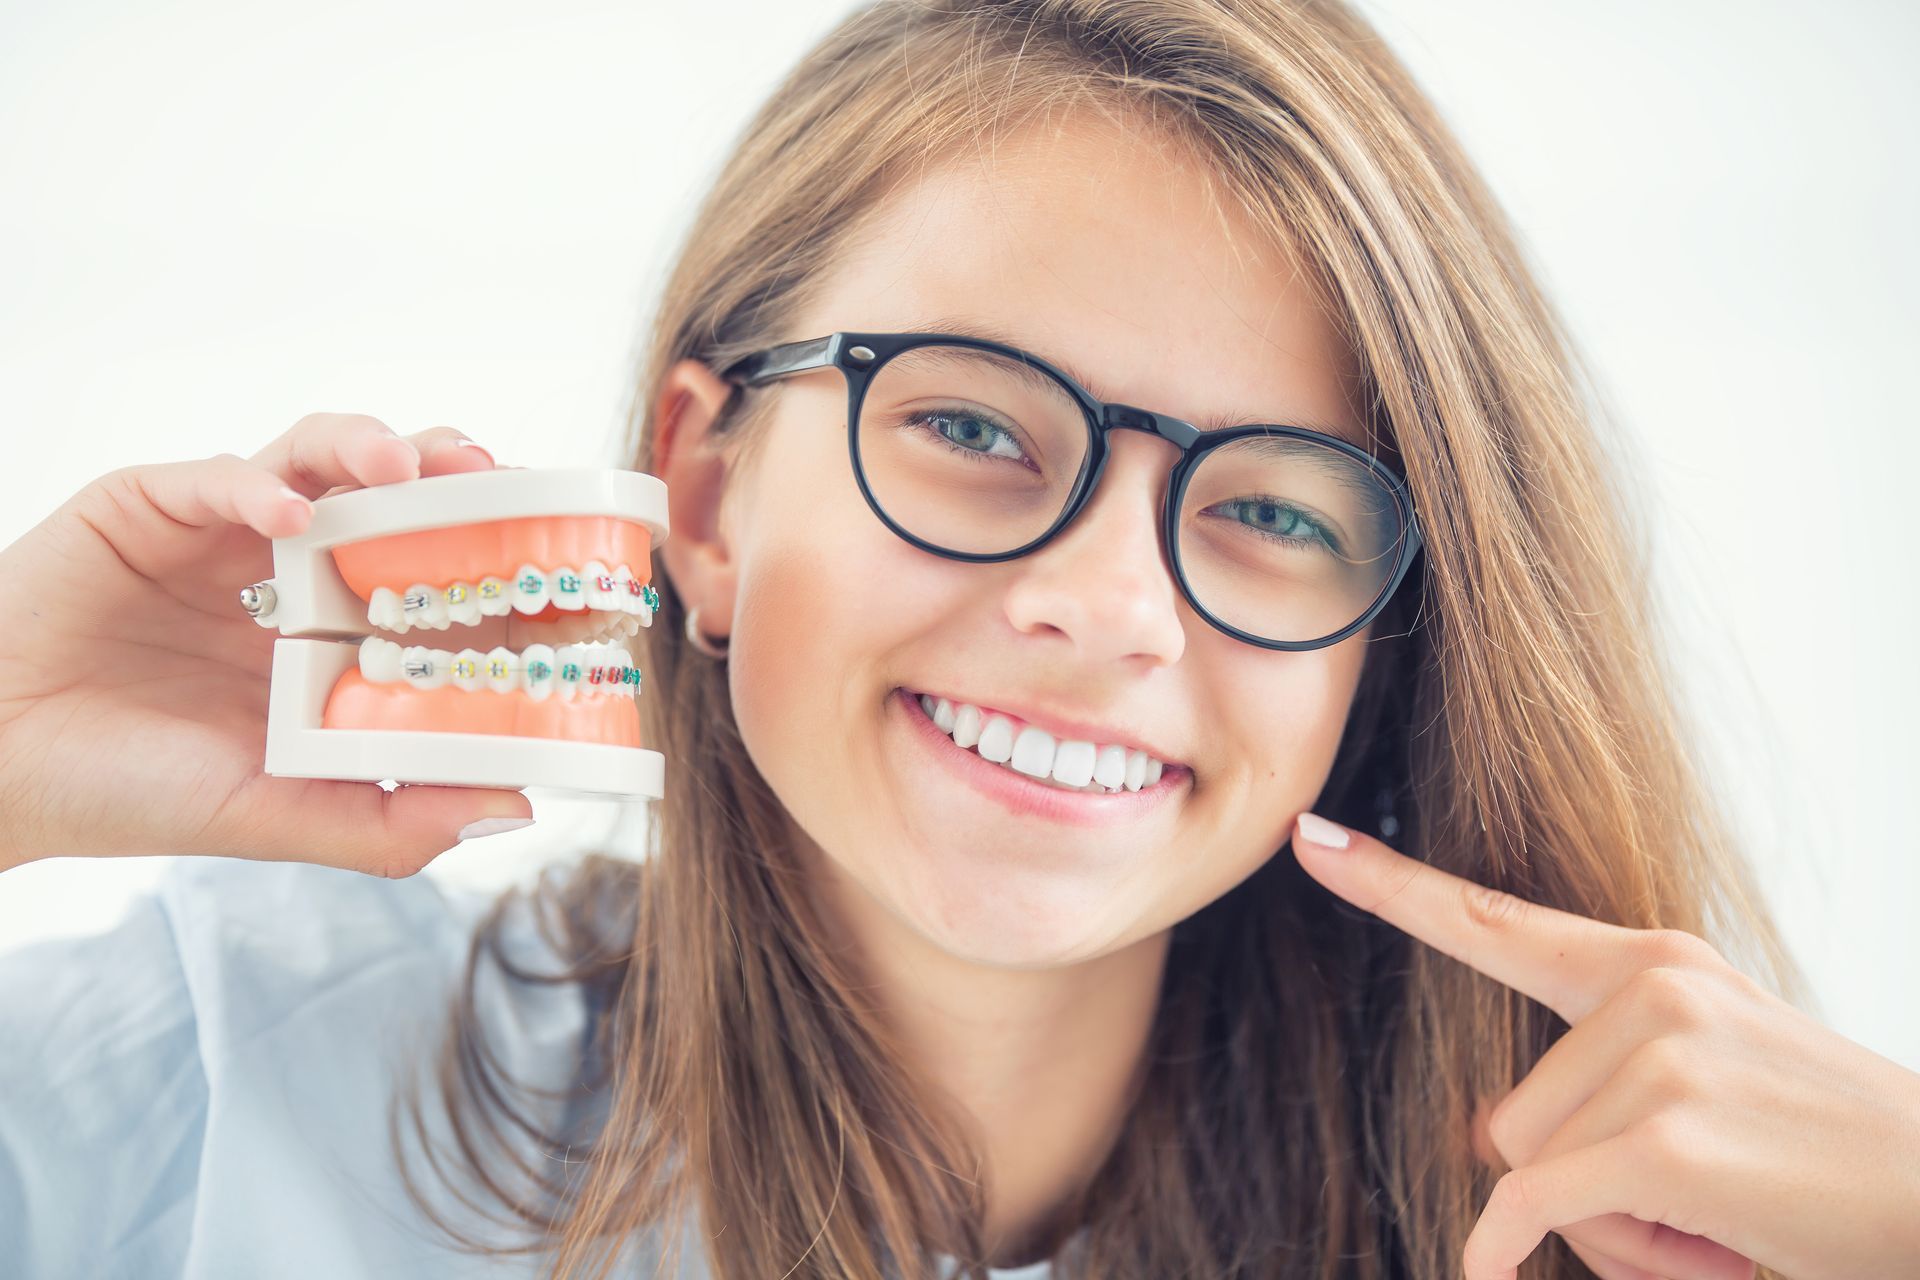 Model of a dental braces in the hand of a young girl with aligned teeth after the process of using a dental brace.